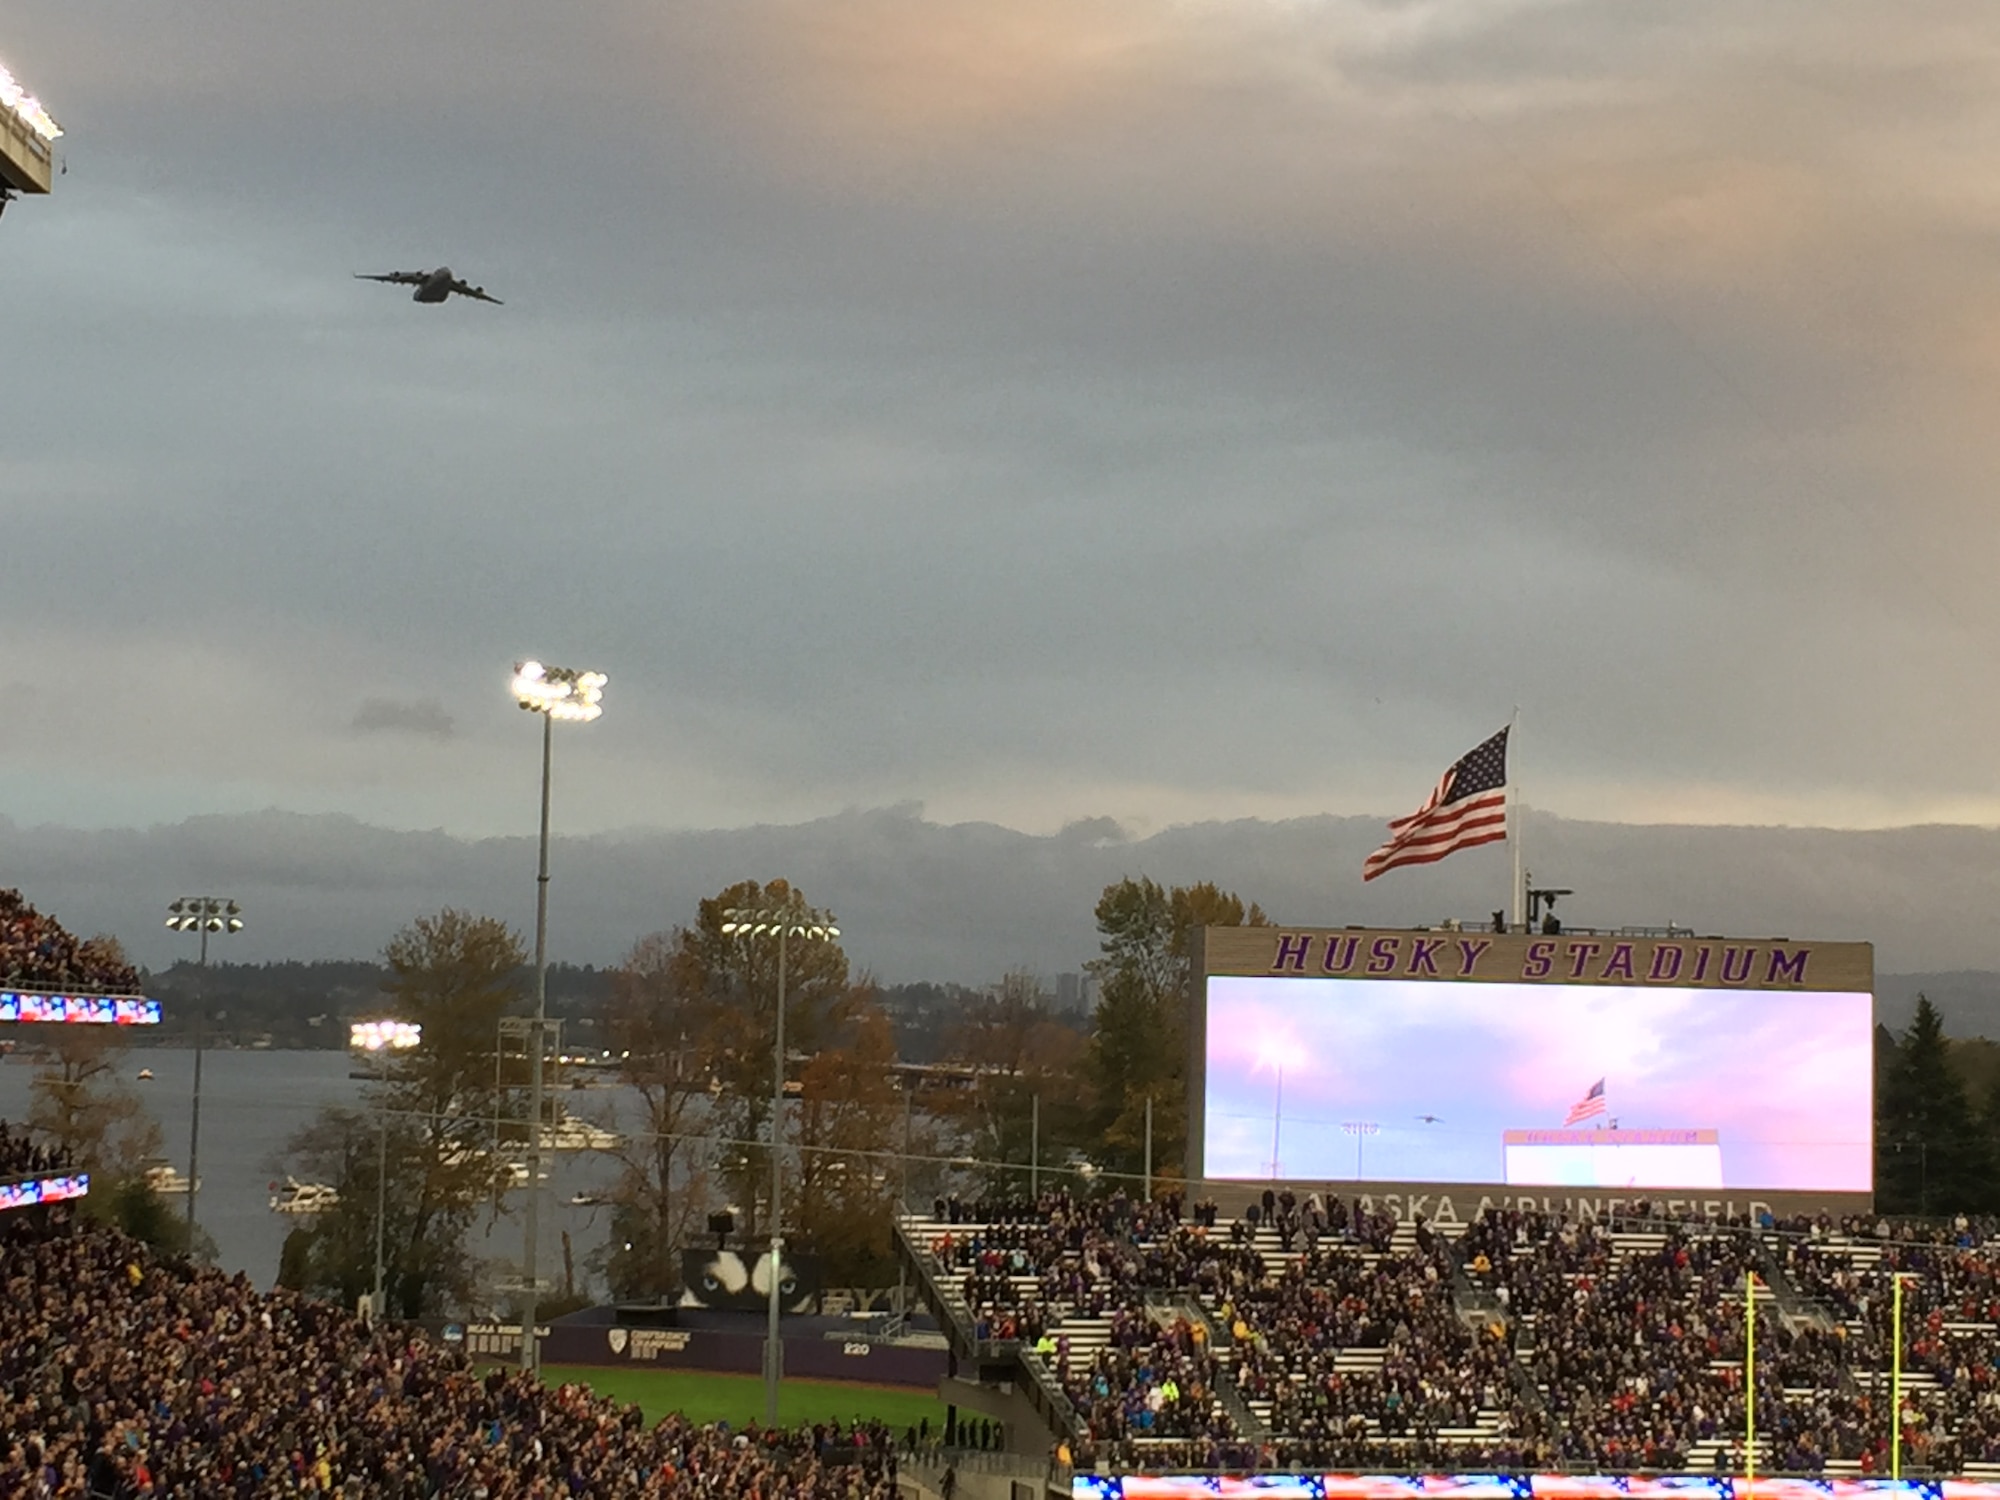 A C-17 Globemaster III piloted by members from the 728th Airlift Squadron flies over the University of Washington Husky stadium during their Veterans Day salute to military members Nov. 12. (Photo by Maj. Brooke Davis)